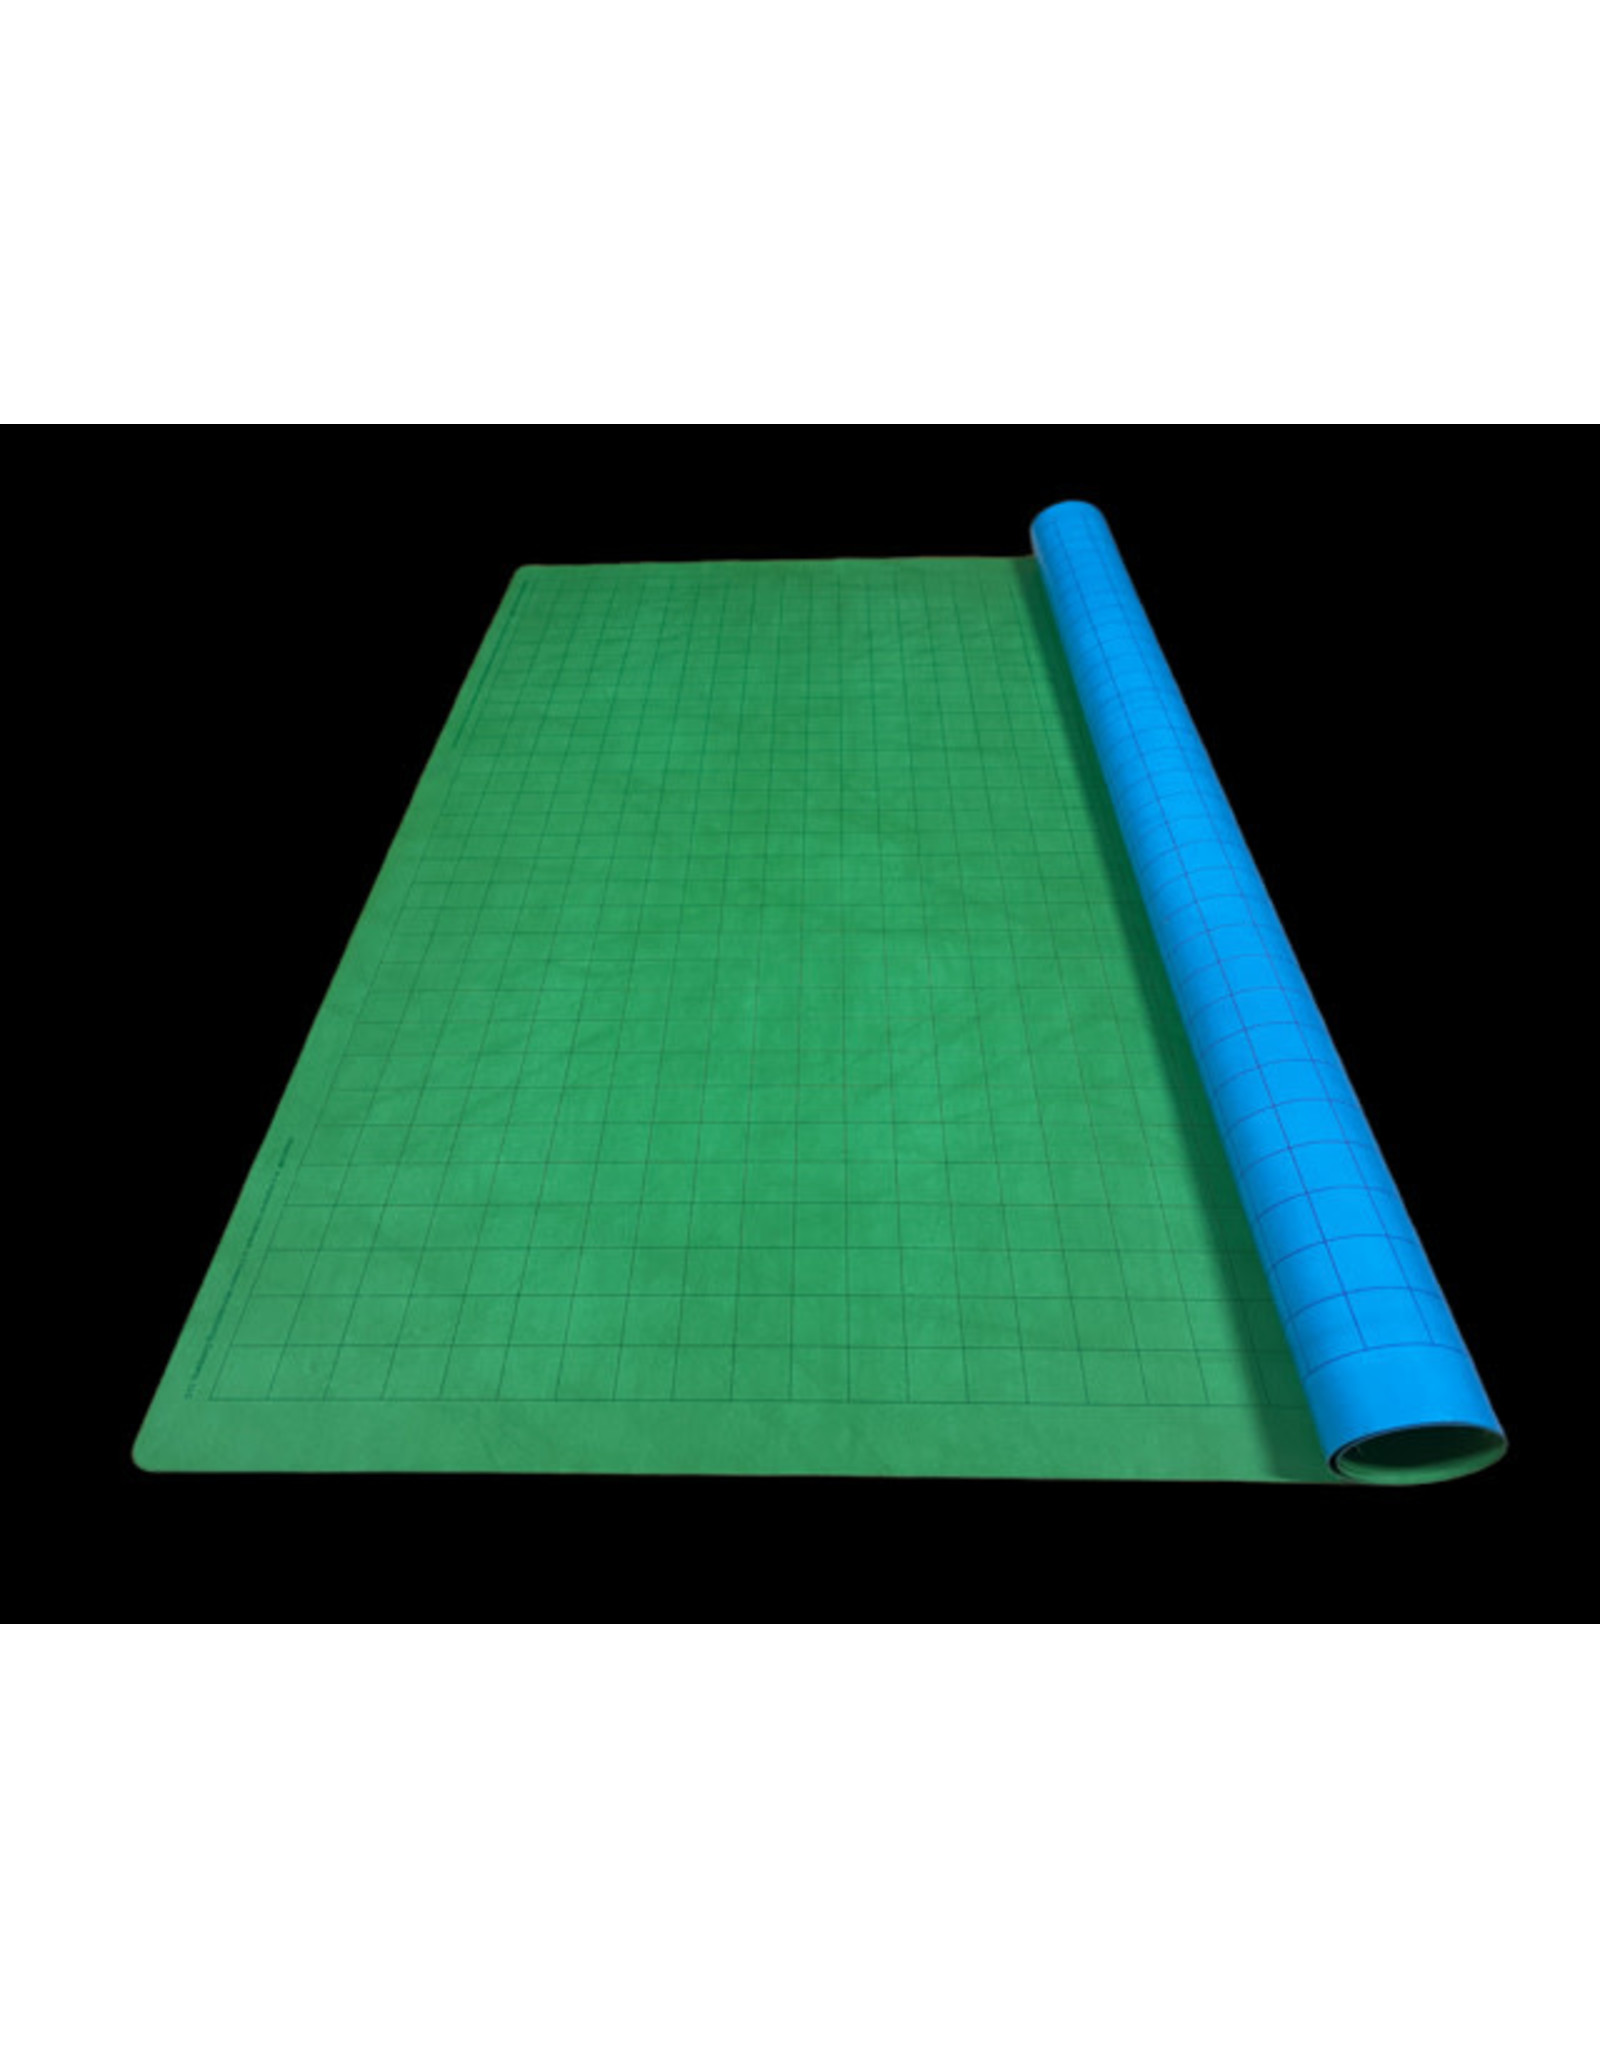 Megamat 1" Reversible Blue-Green Squares (34½" x 48" Playing Surface)